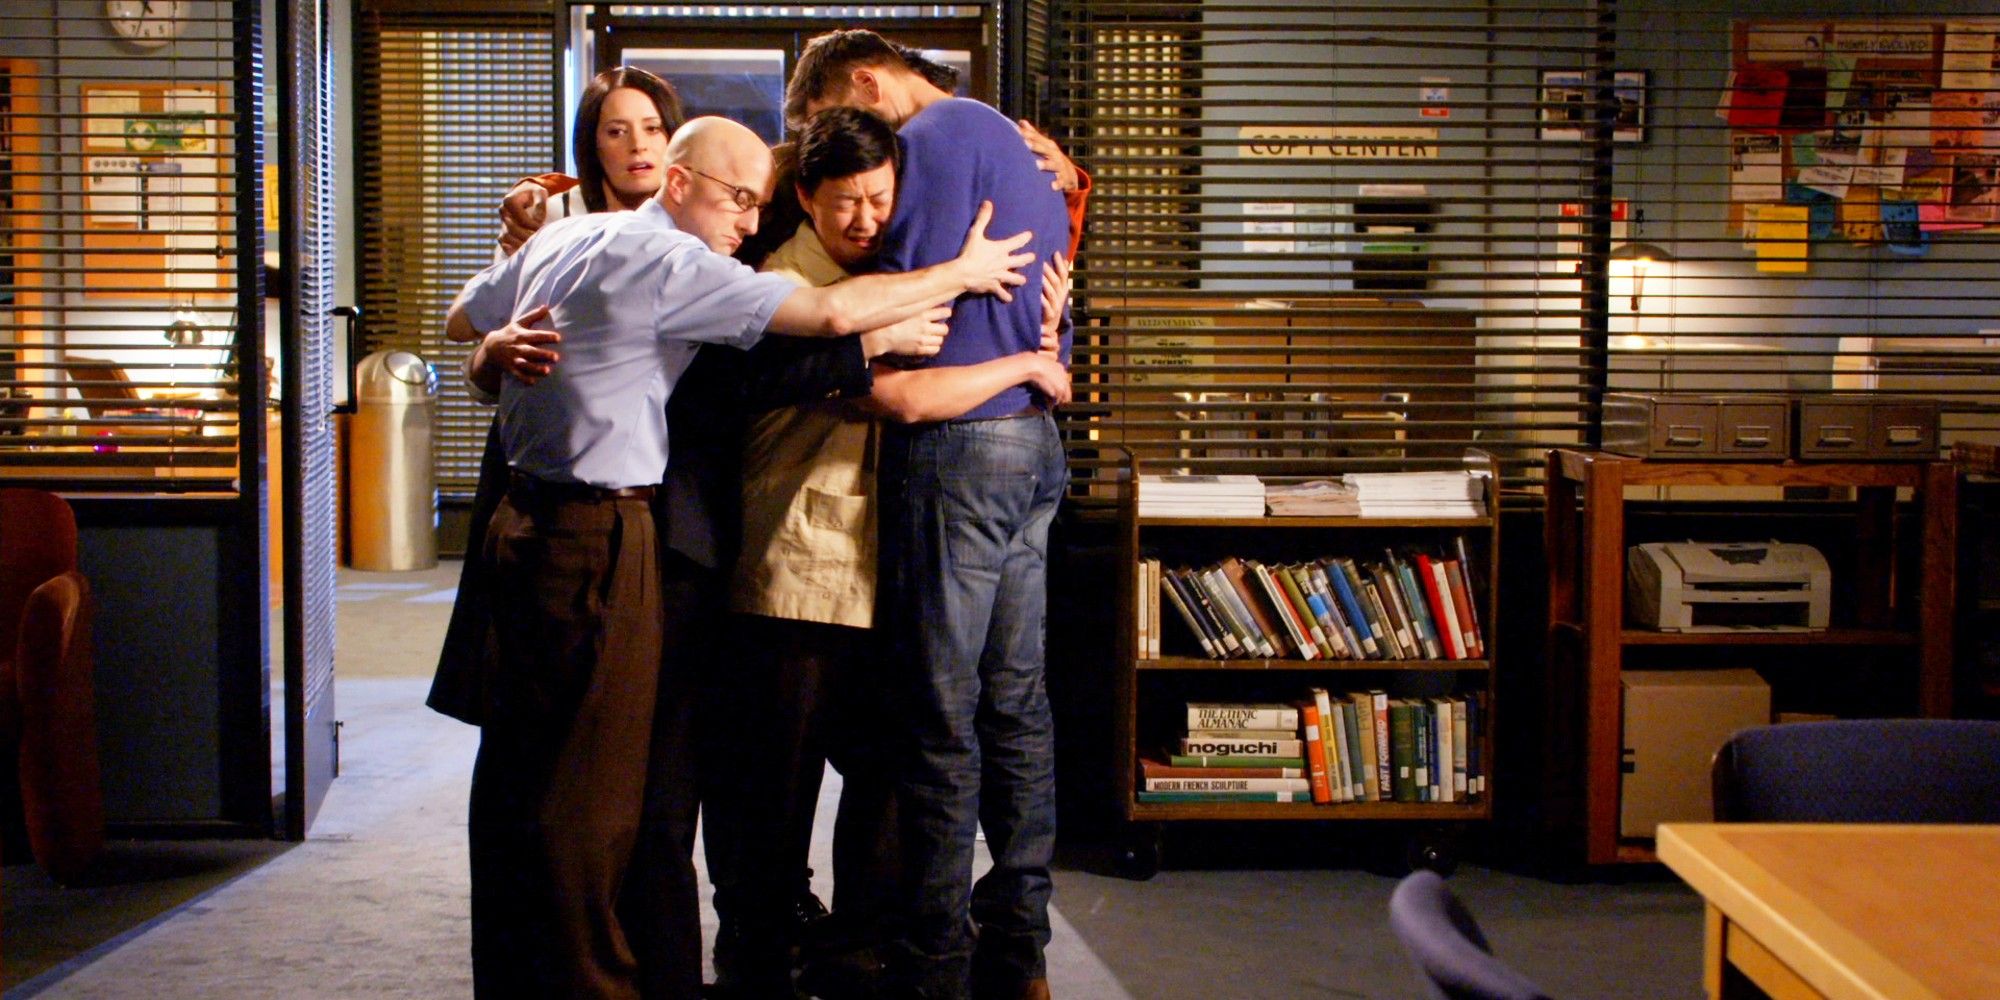 The Save Greendale Committee hugging in the series finale of Community